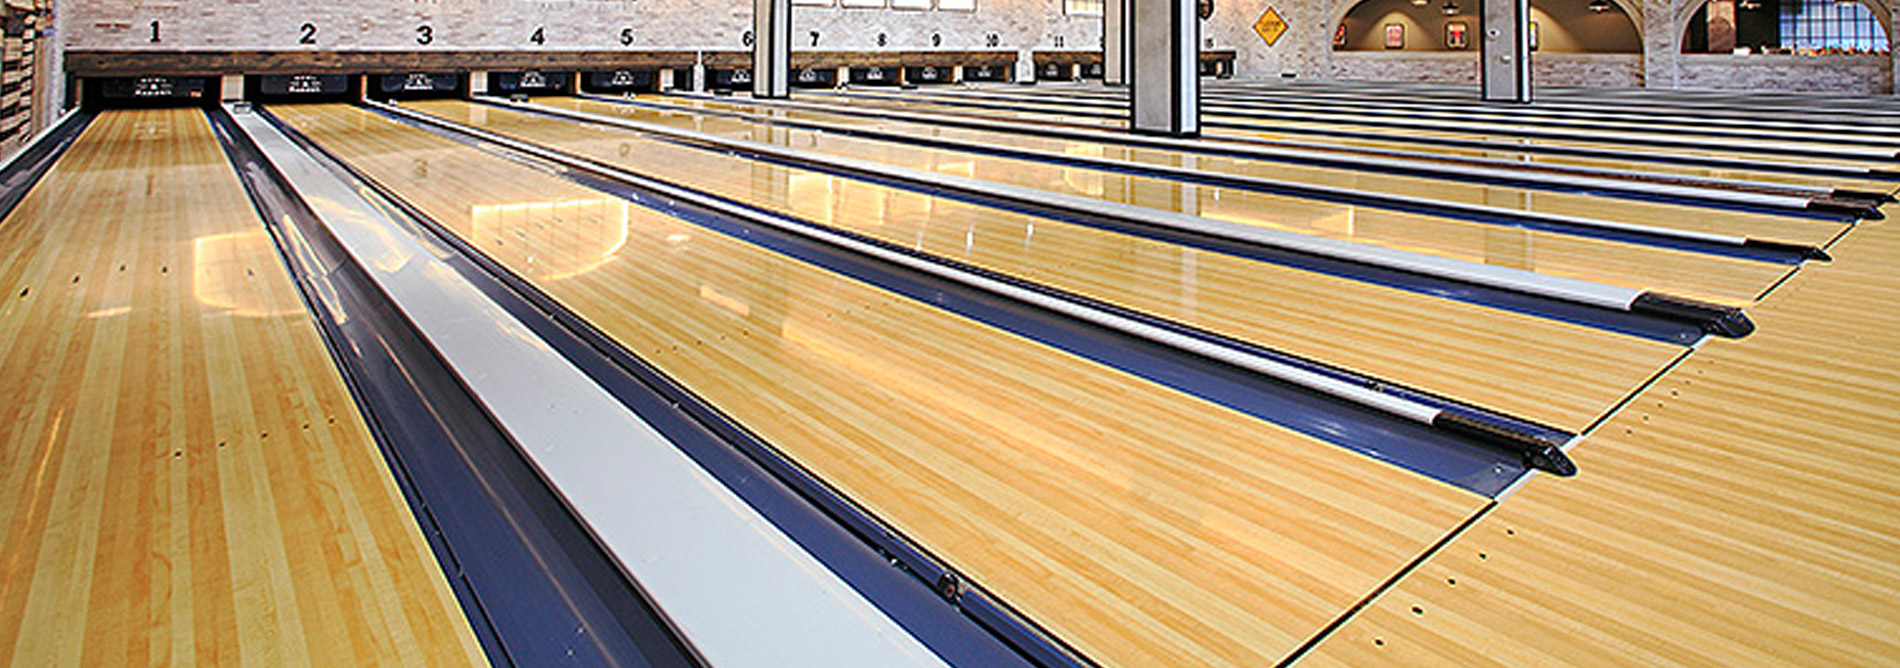 Bowling-QubicaAMF-lanes-spl-Select-Appearance-banner.jpg